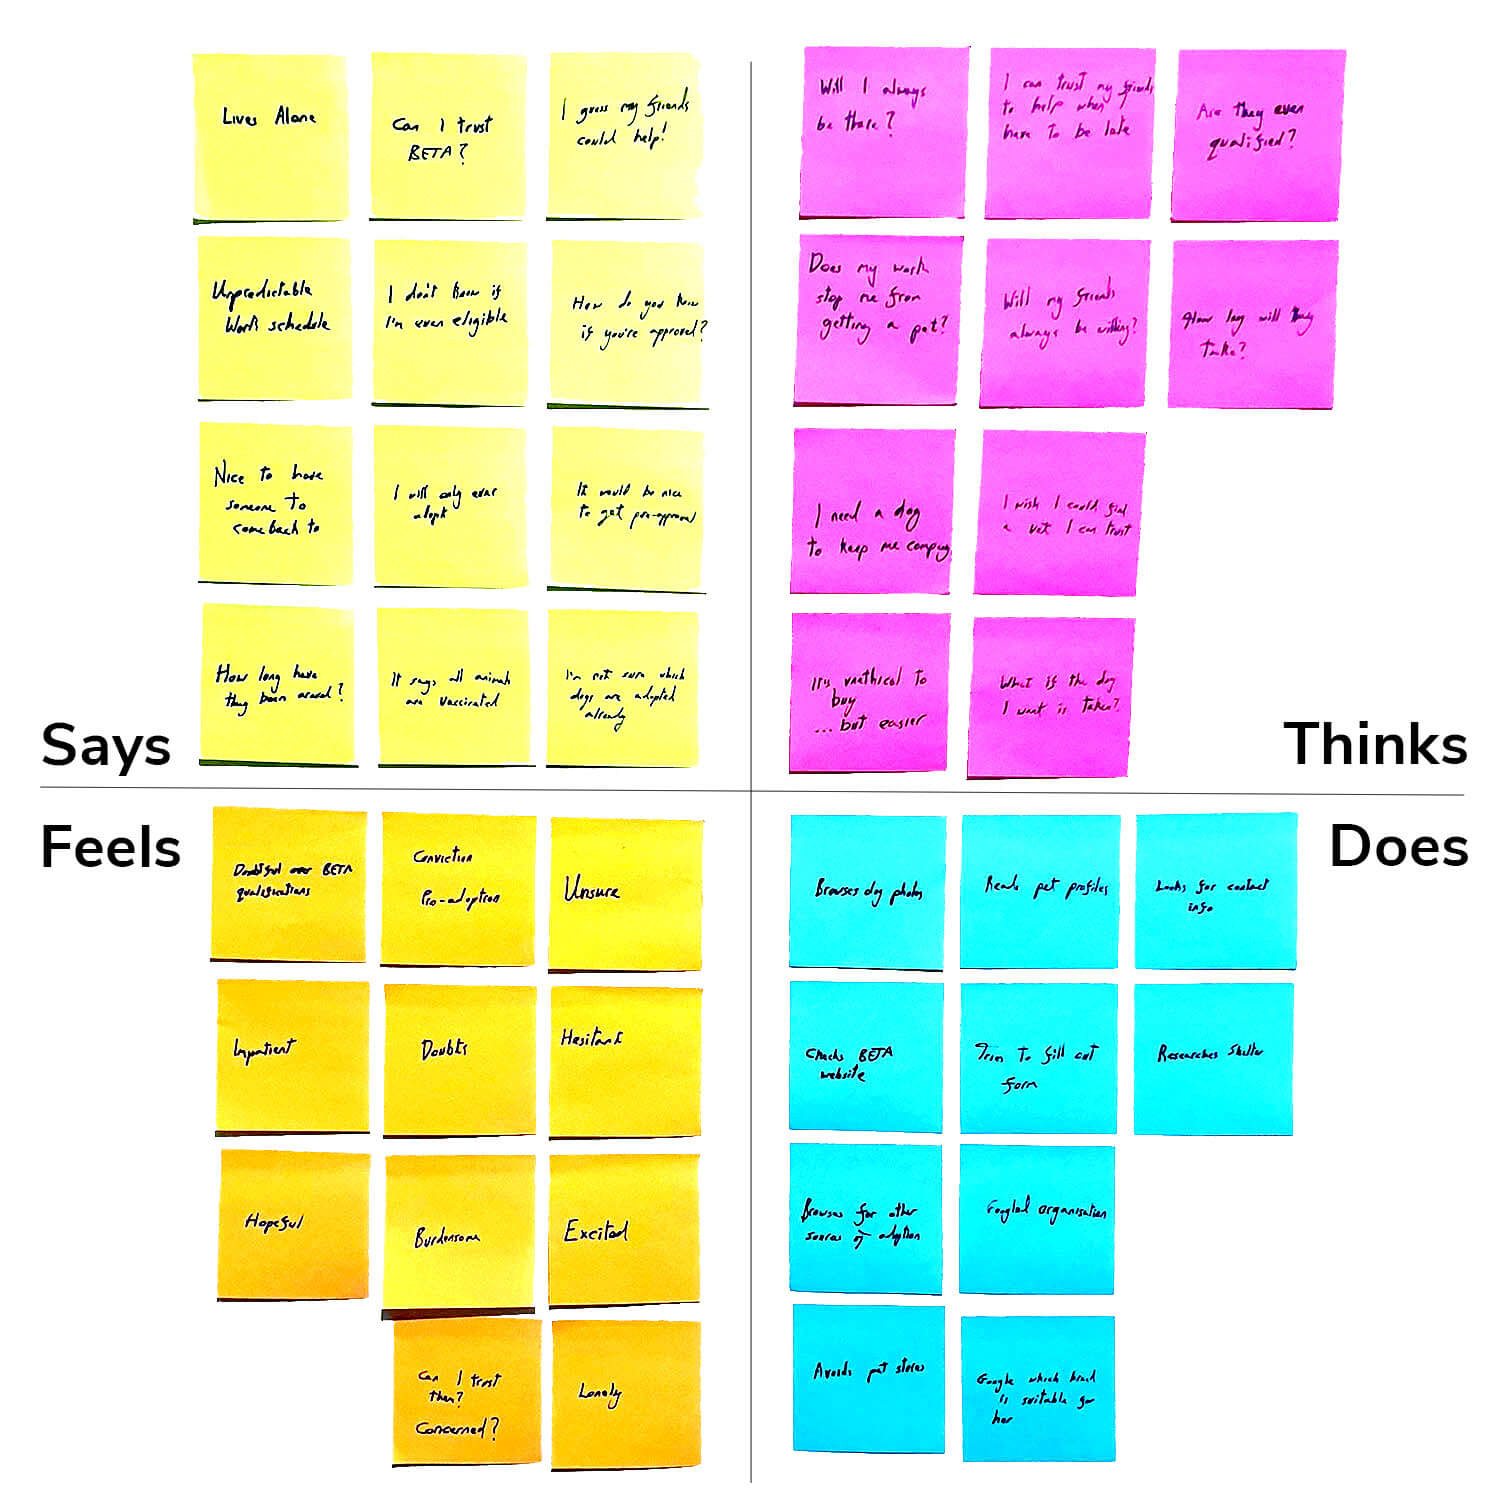 UX User Empathy Map for the Persona Maya